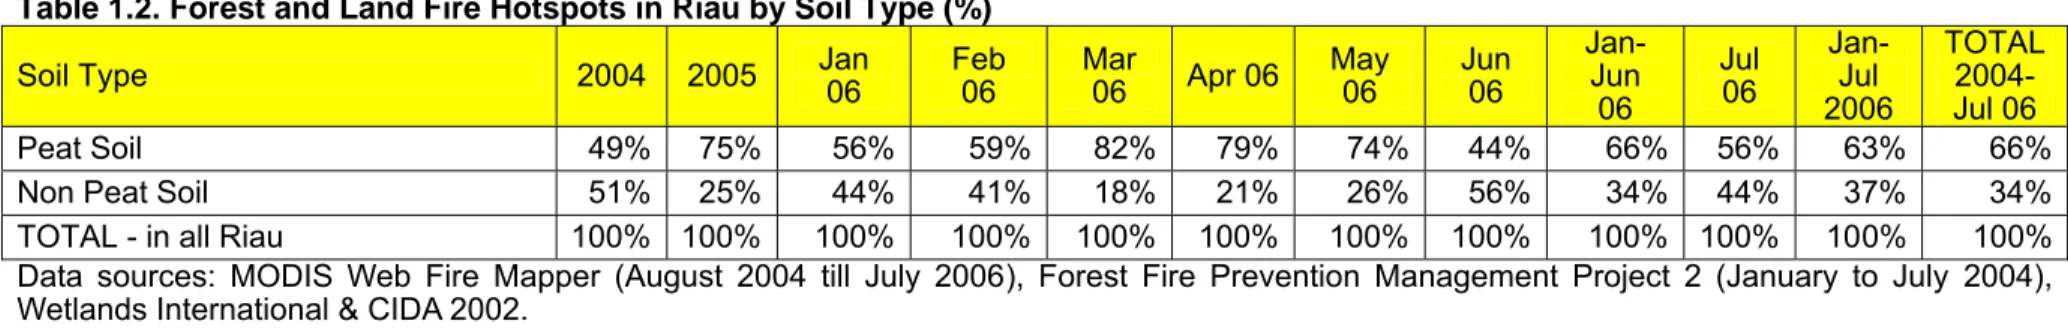 Table 1.2. Forest and Land Fire Hotspots in Riau by Soil Type (%) 